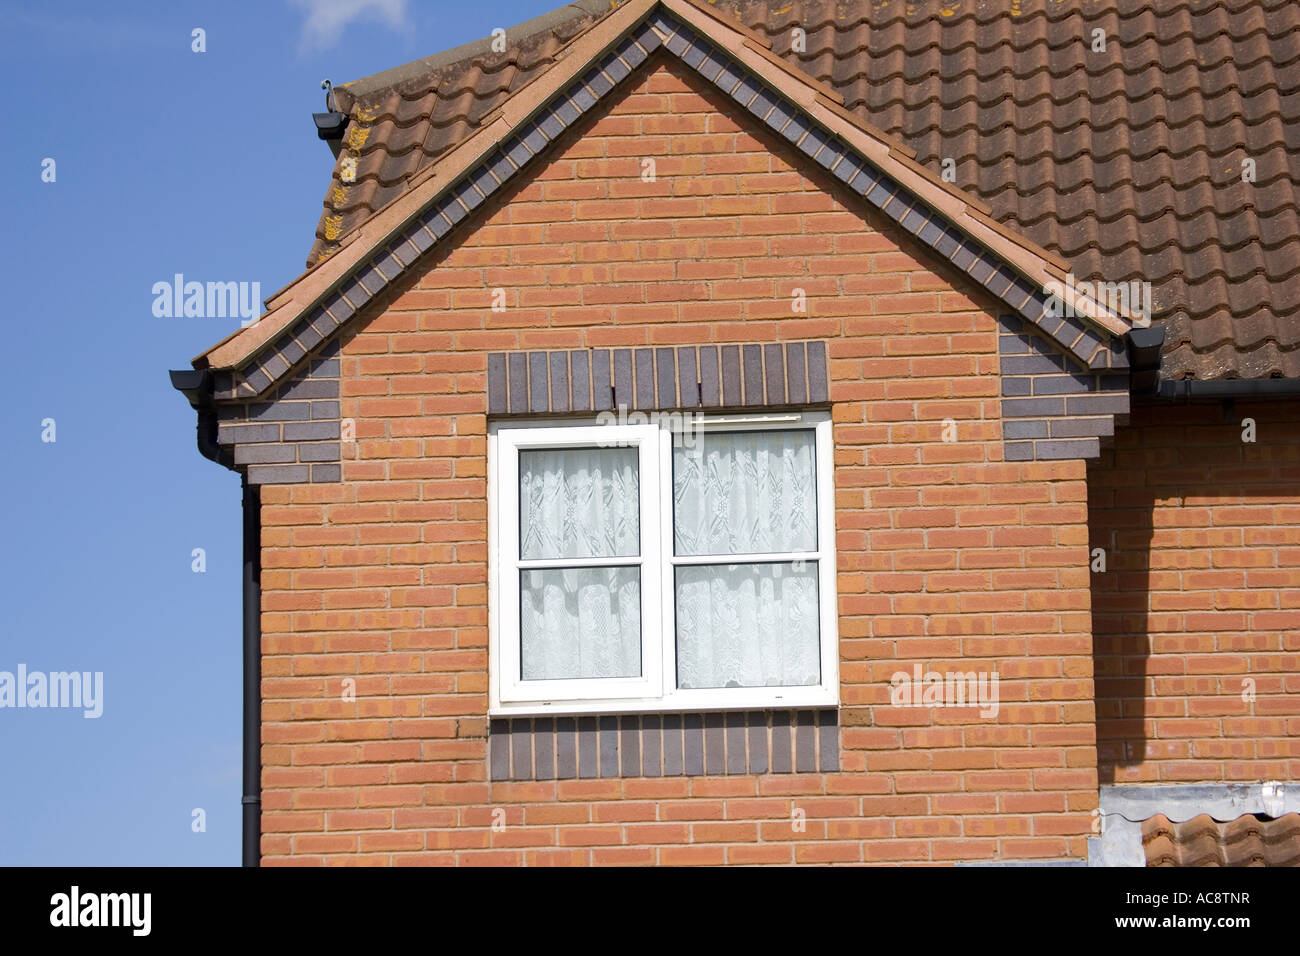 gable end of red brick house showing corbelling and